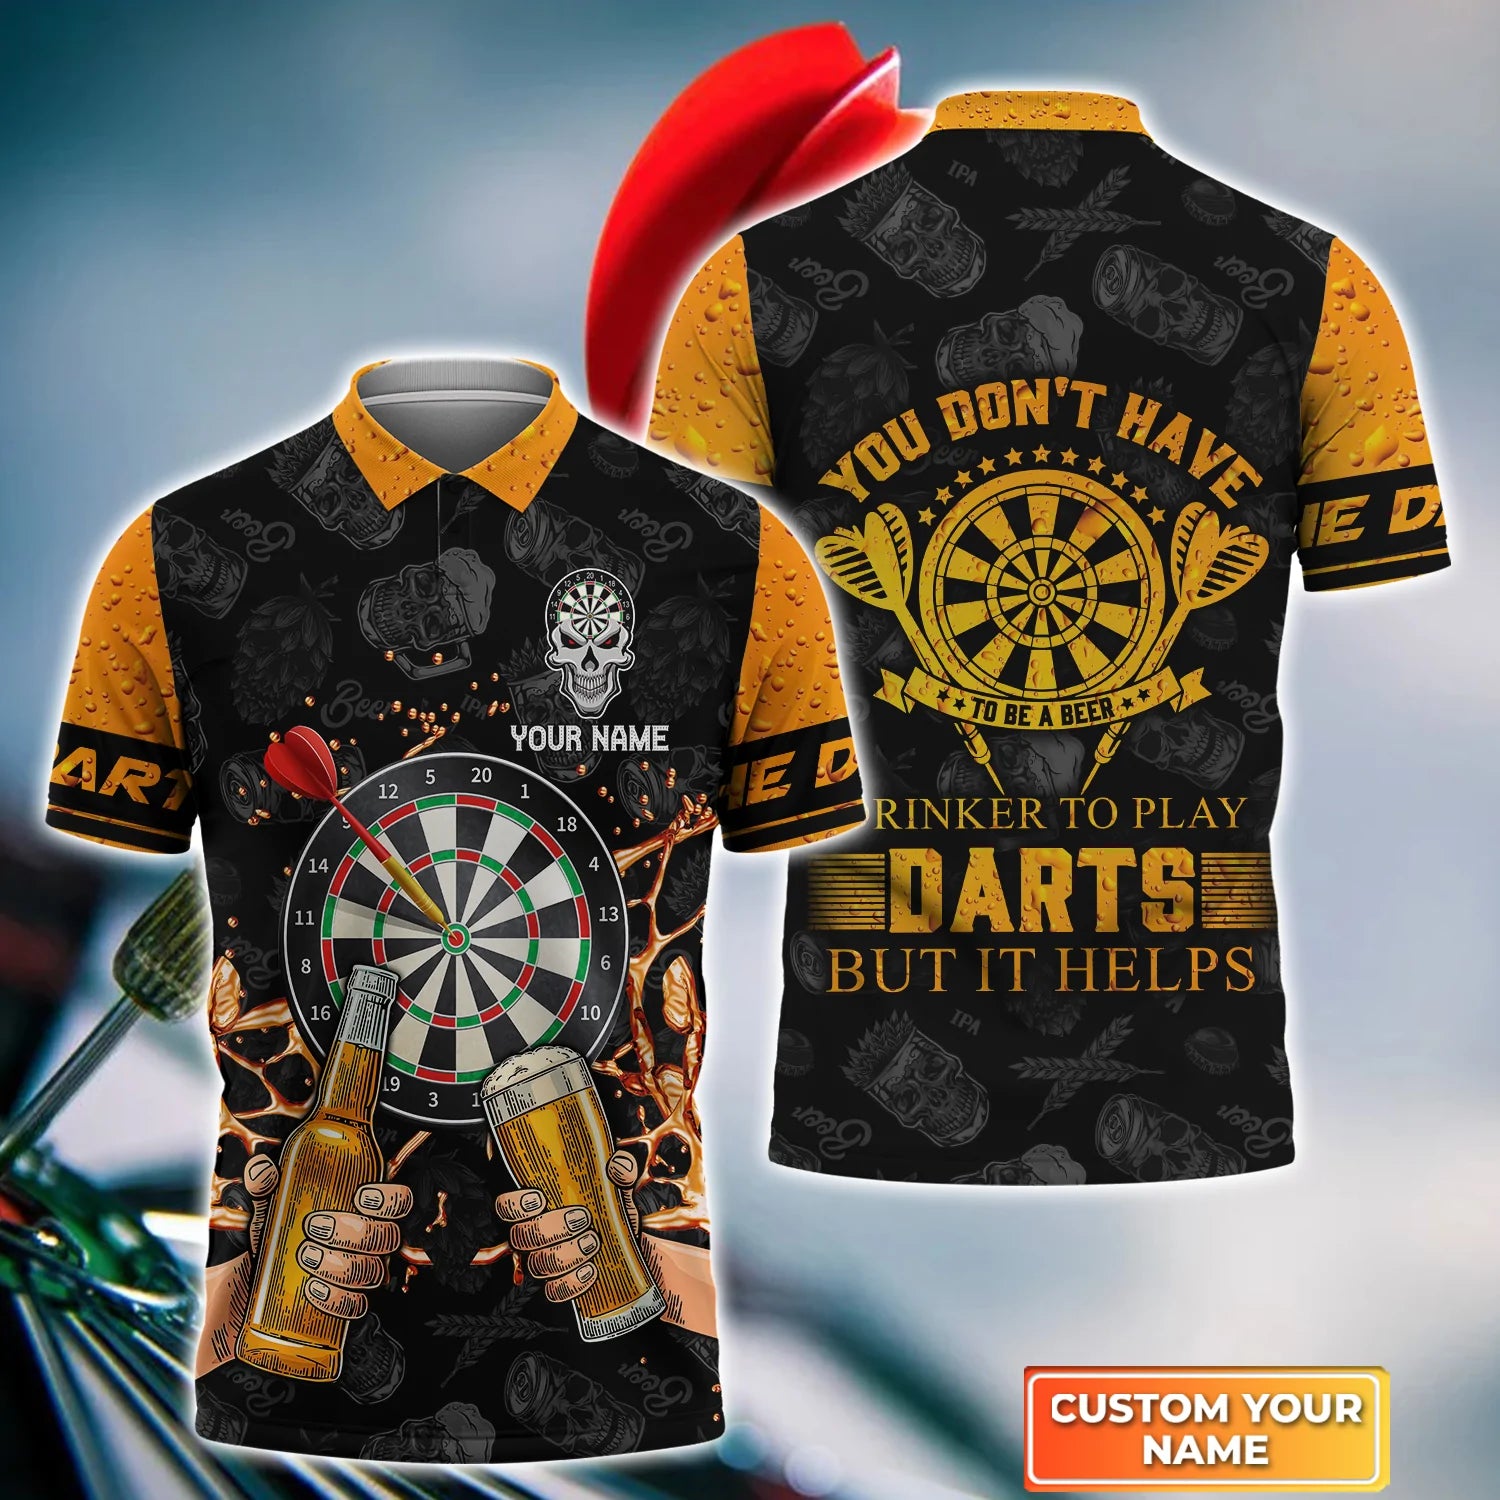 Dart Team Shirts: Perfect for Non-Beer Drinkers Who Love Playing Darts and Polo – DP116